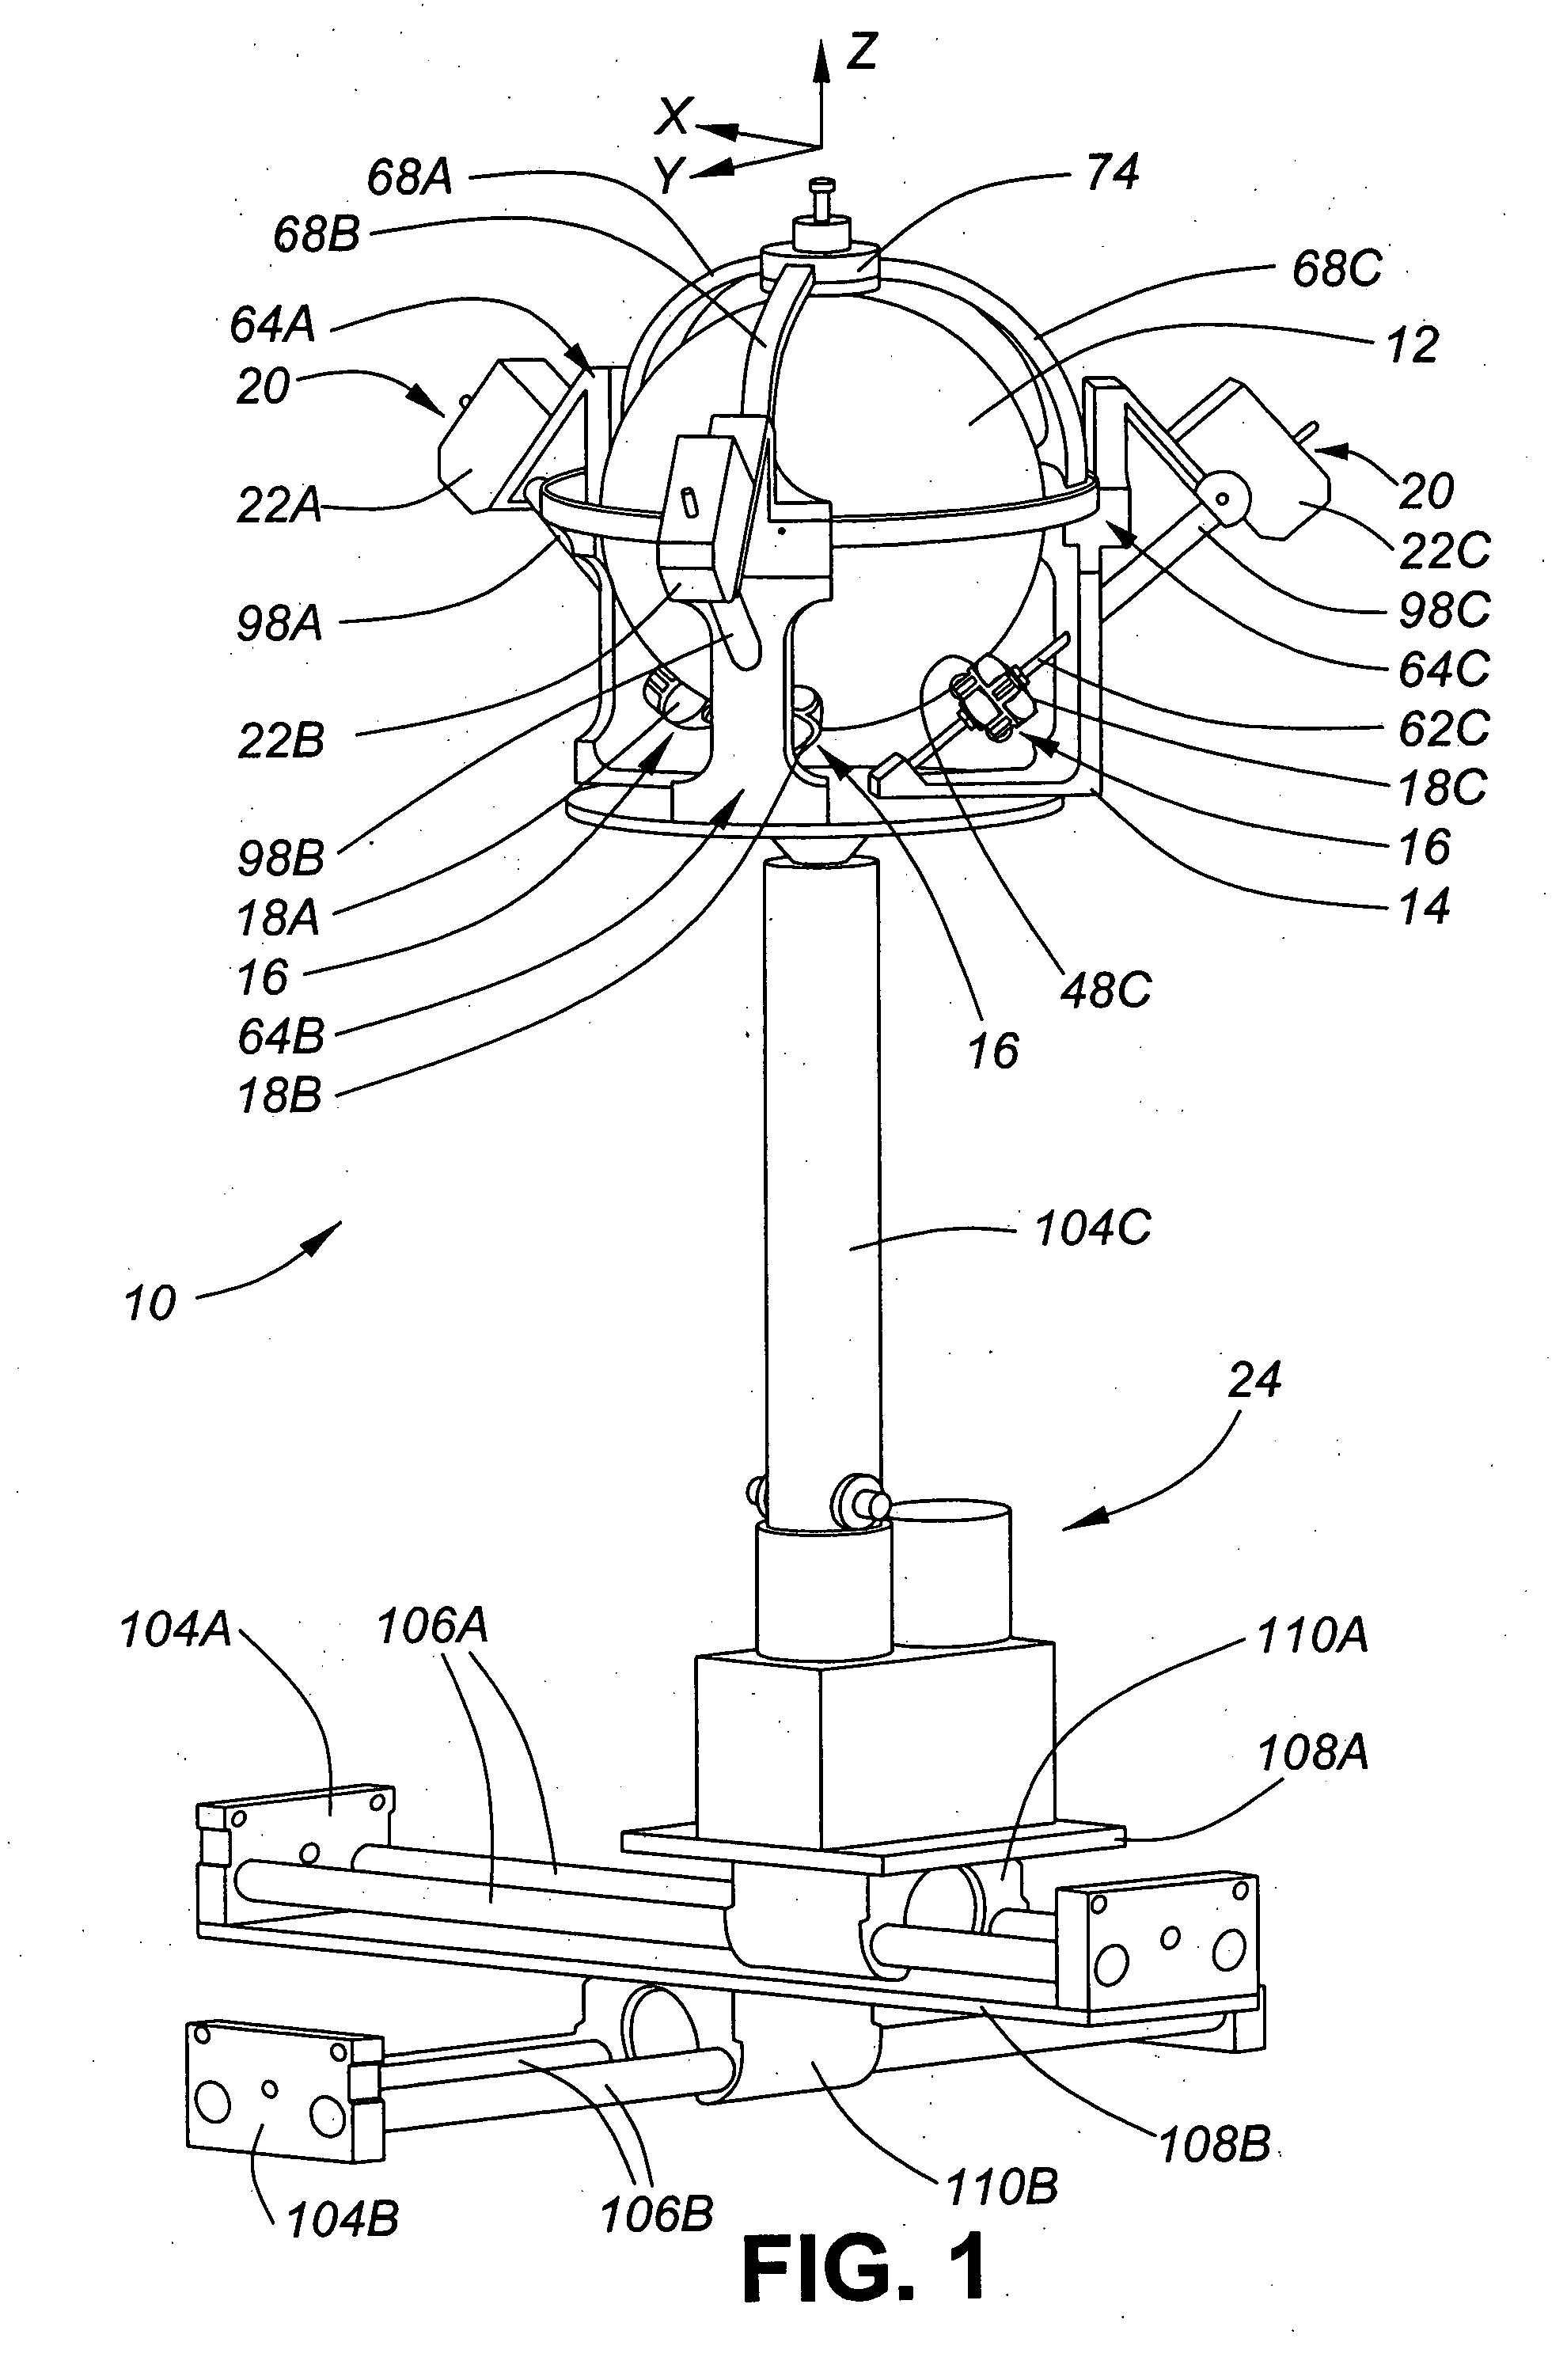 Apparatus for multi-axis rotation and translation